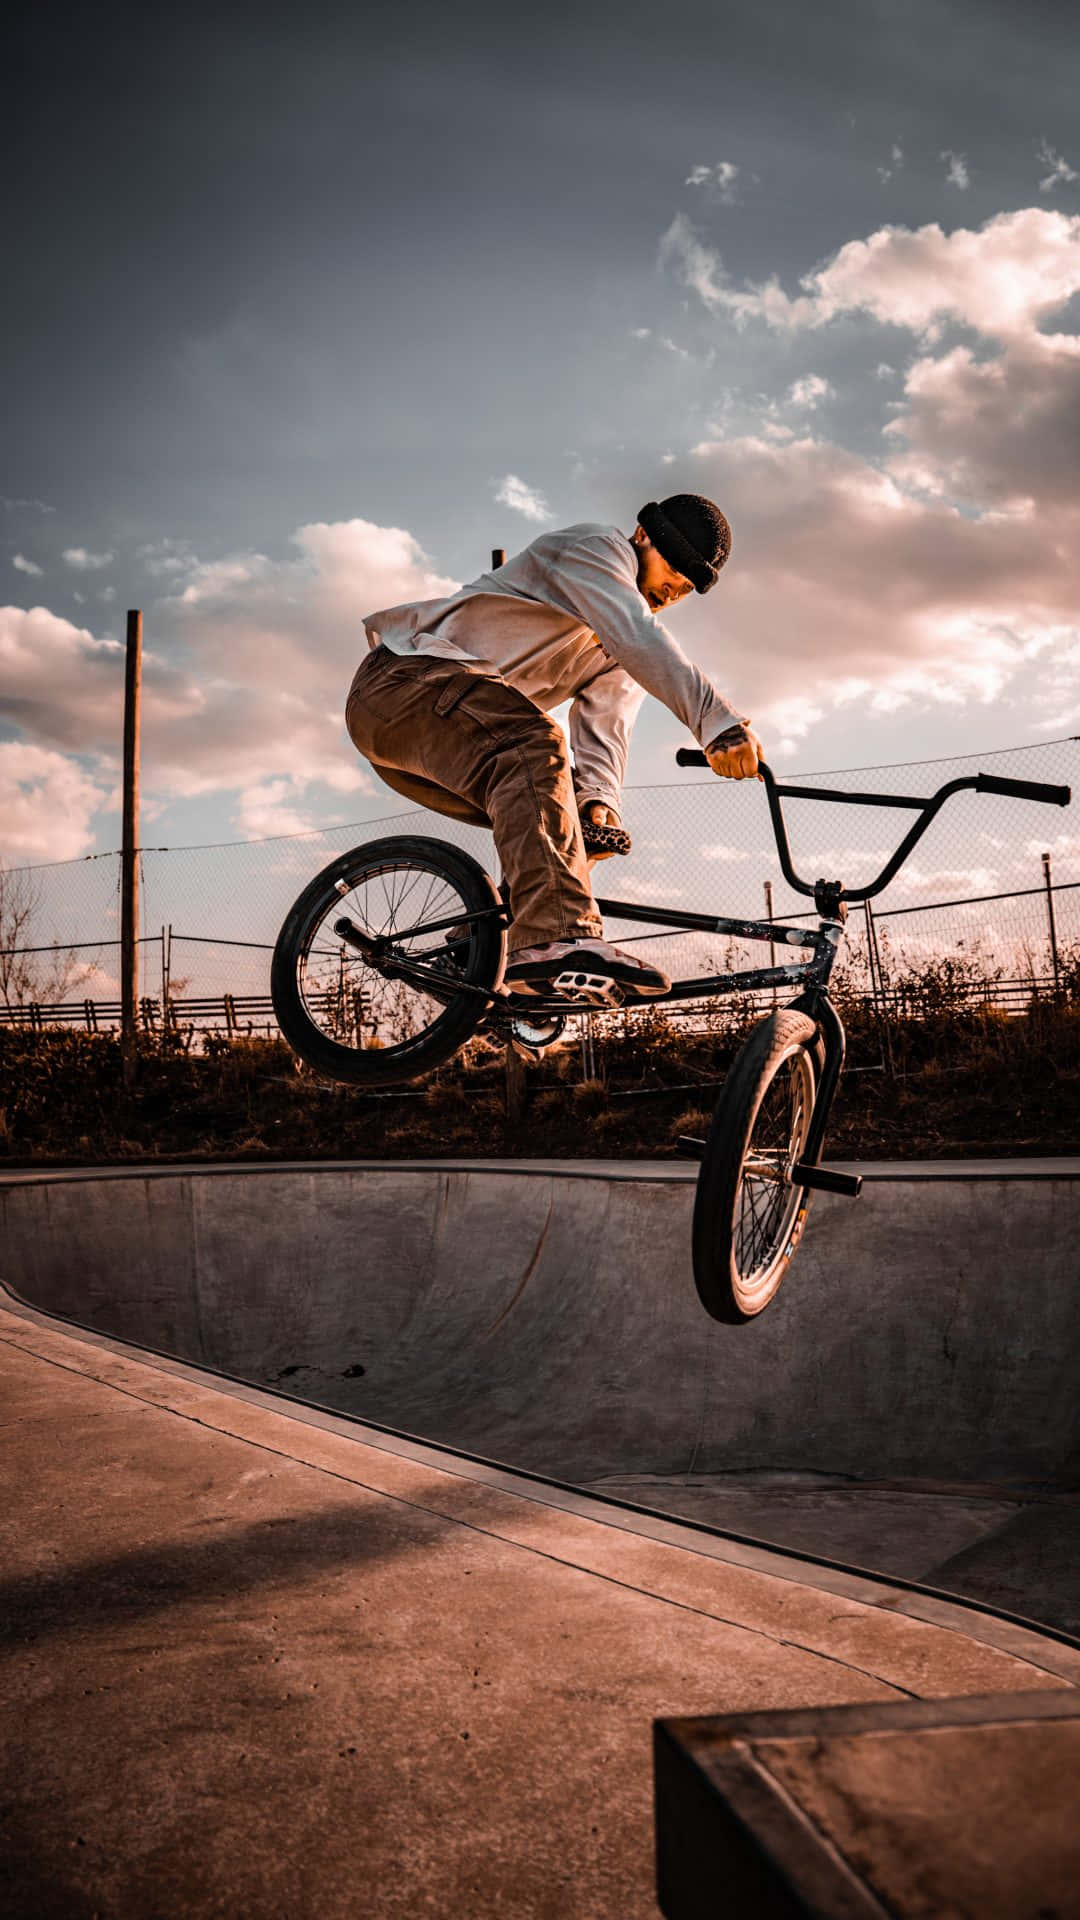 Skatepark Freestyle Freeride for an Adrenaline-Packed BMX Experience Wallpaper